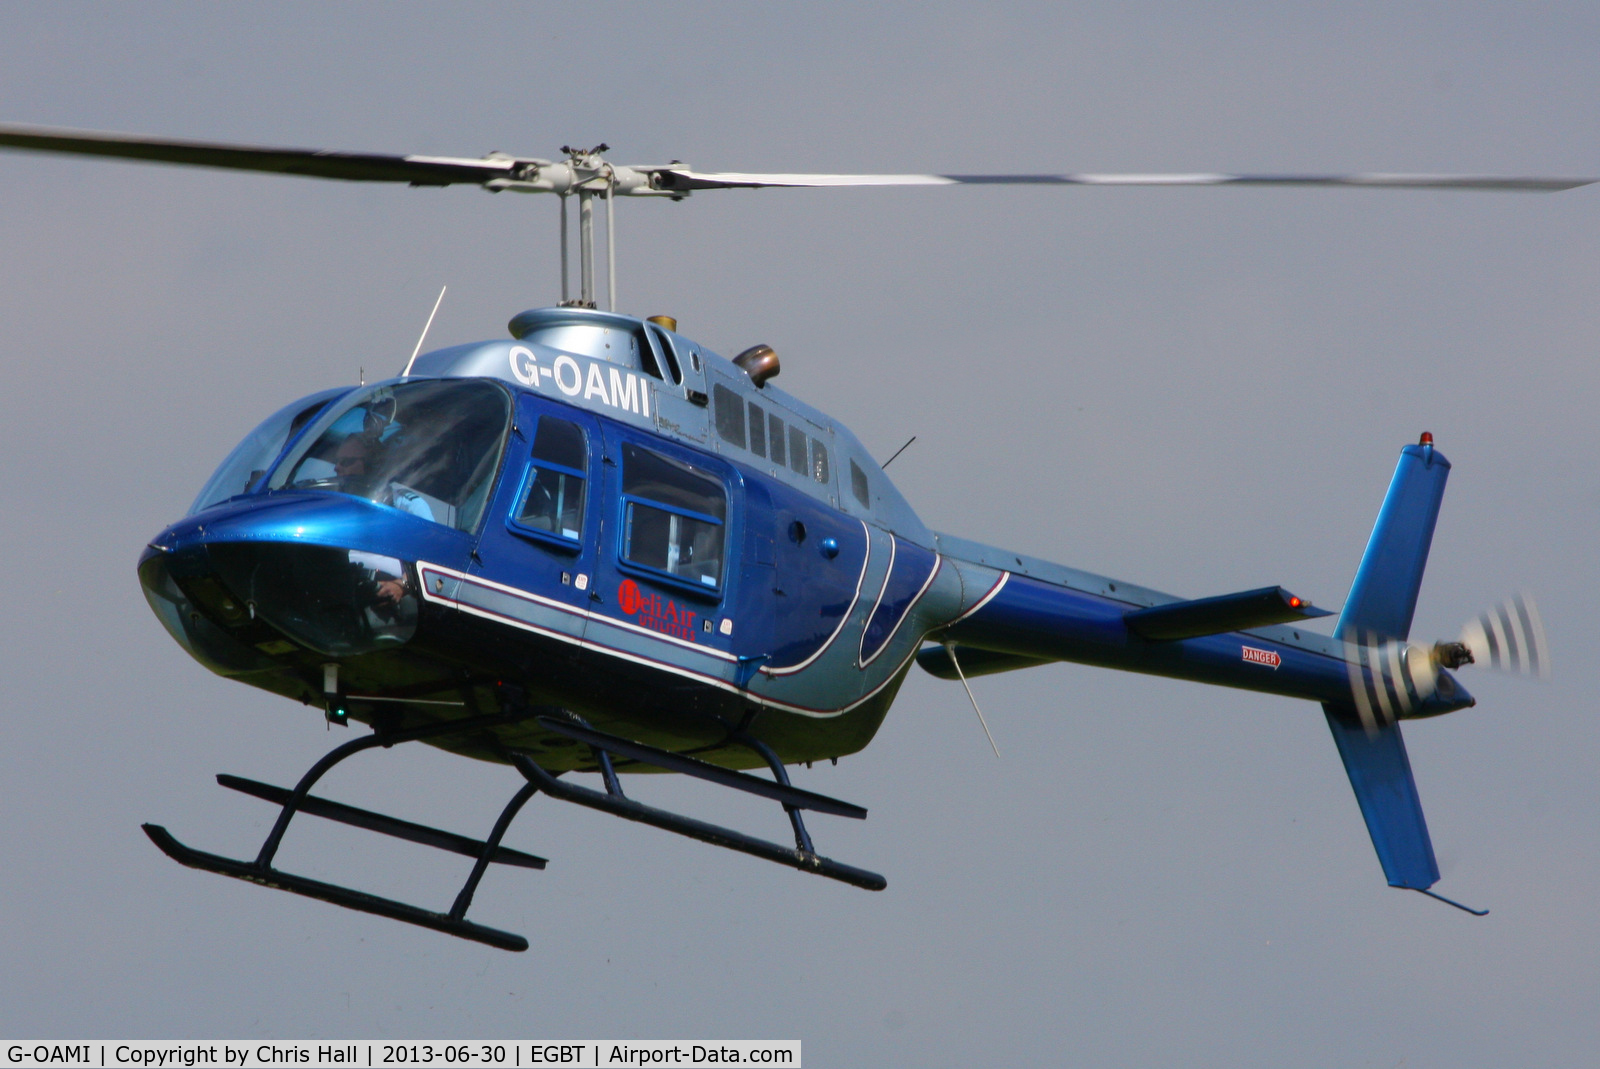 G-OAMI, 1968 Bell 206B JetRanger II C/N 464, being used for ferrying race fans to the British F1 Grand Prix at Silverstone